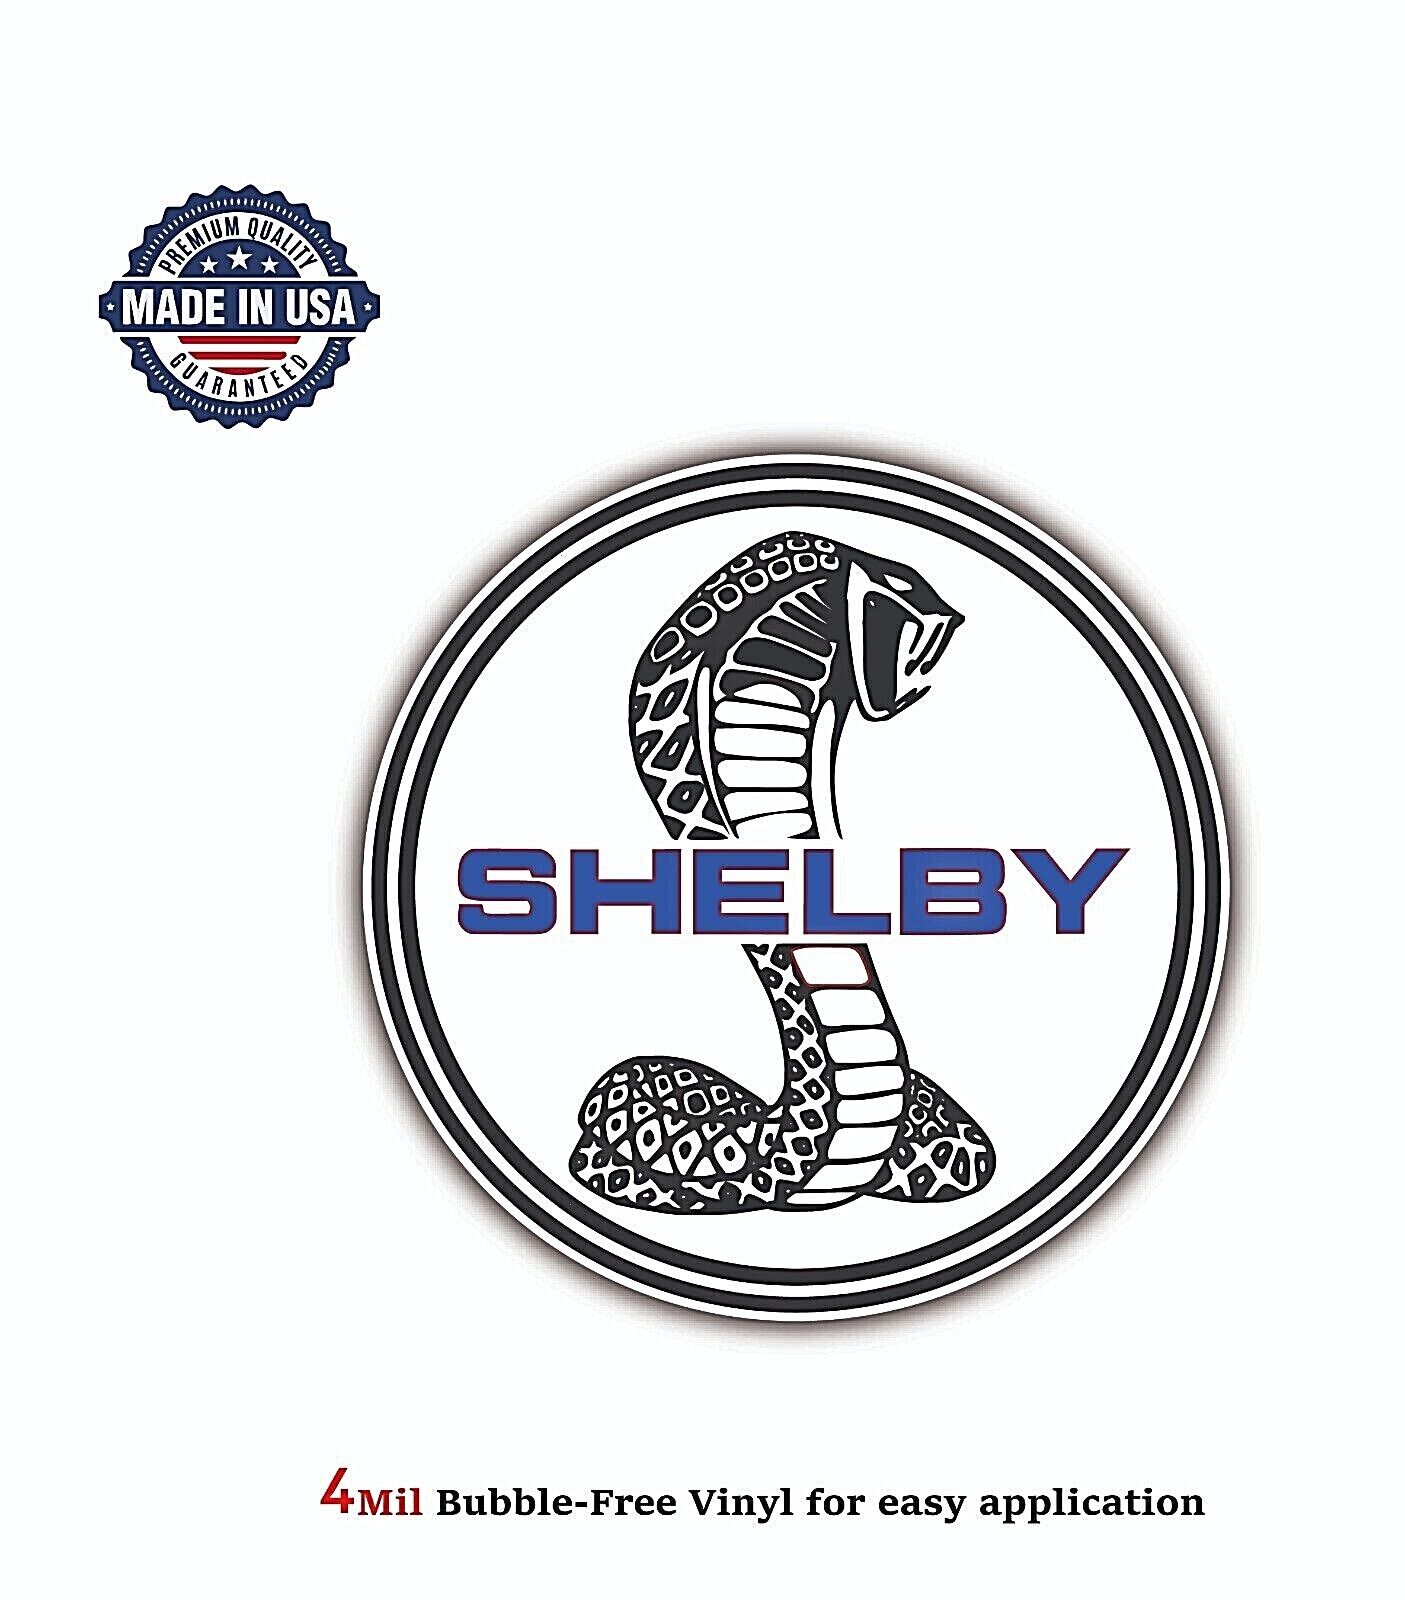 SHELBY COBRA FORD VINYL DECAL STICKER CAR TRUCK BUMPER 4MIL BUBBLE FREE US MADE